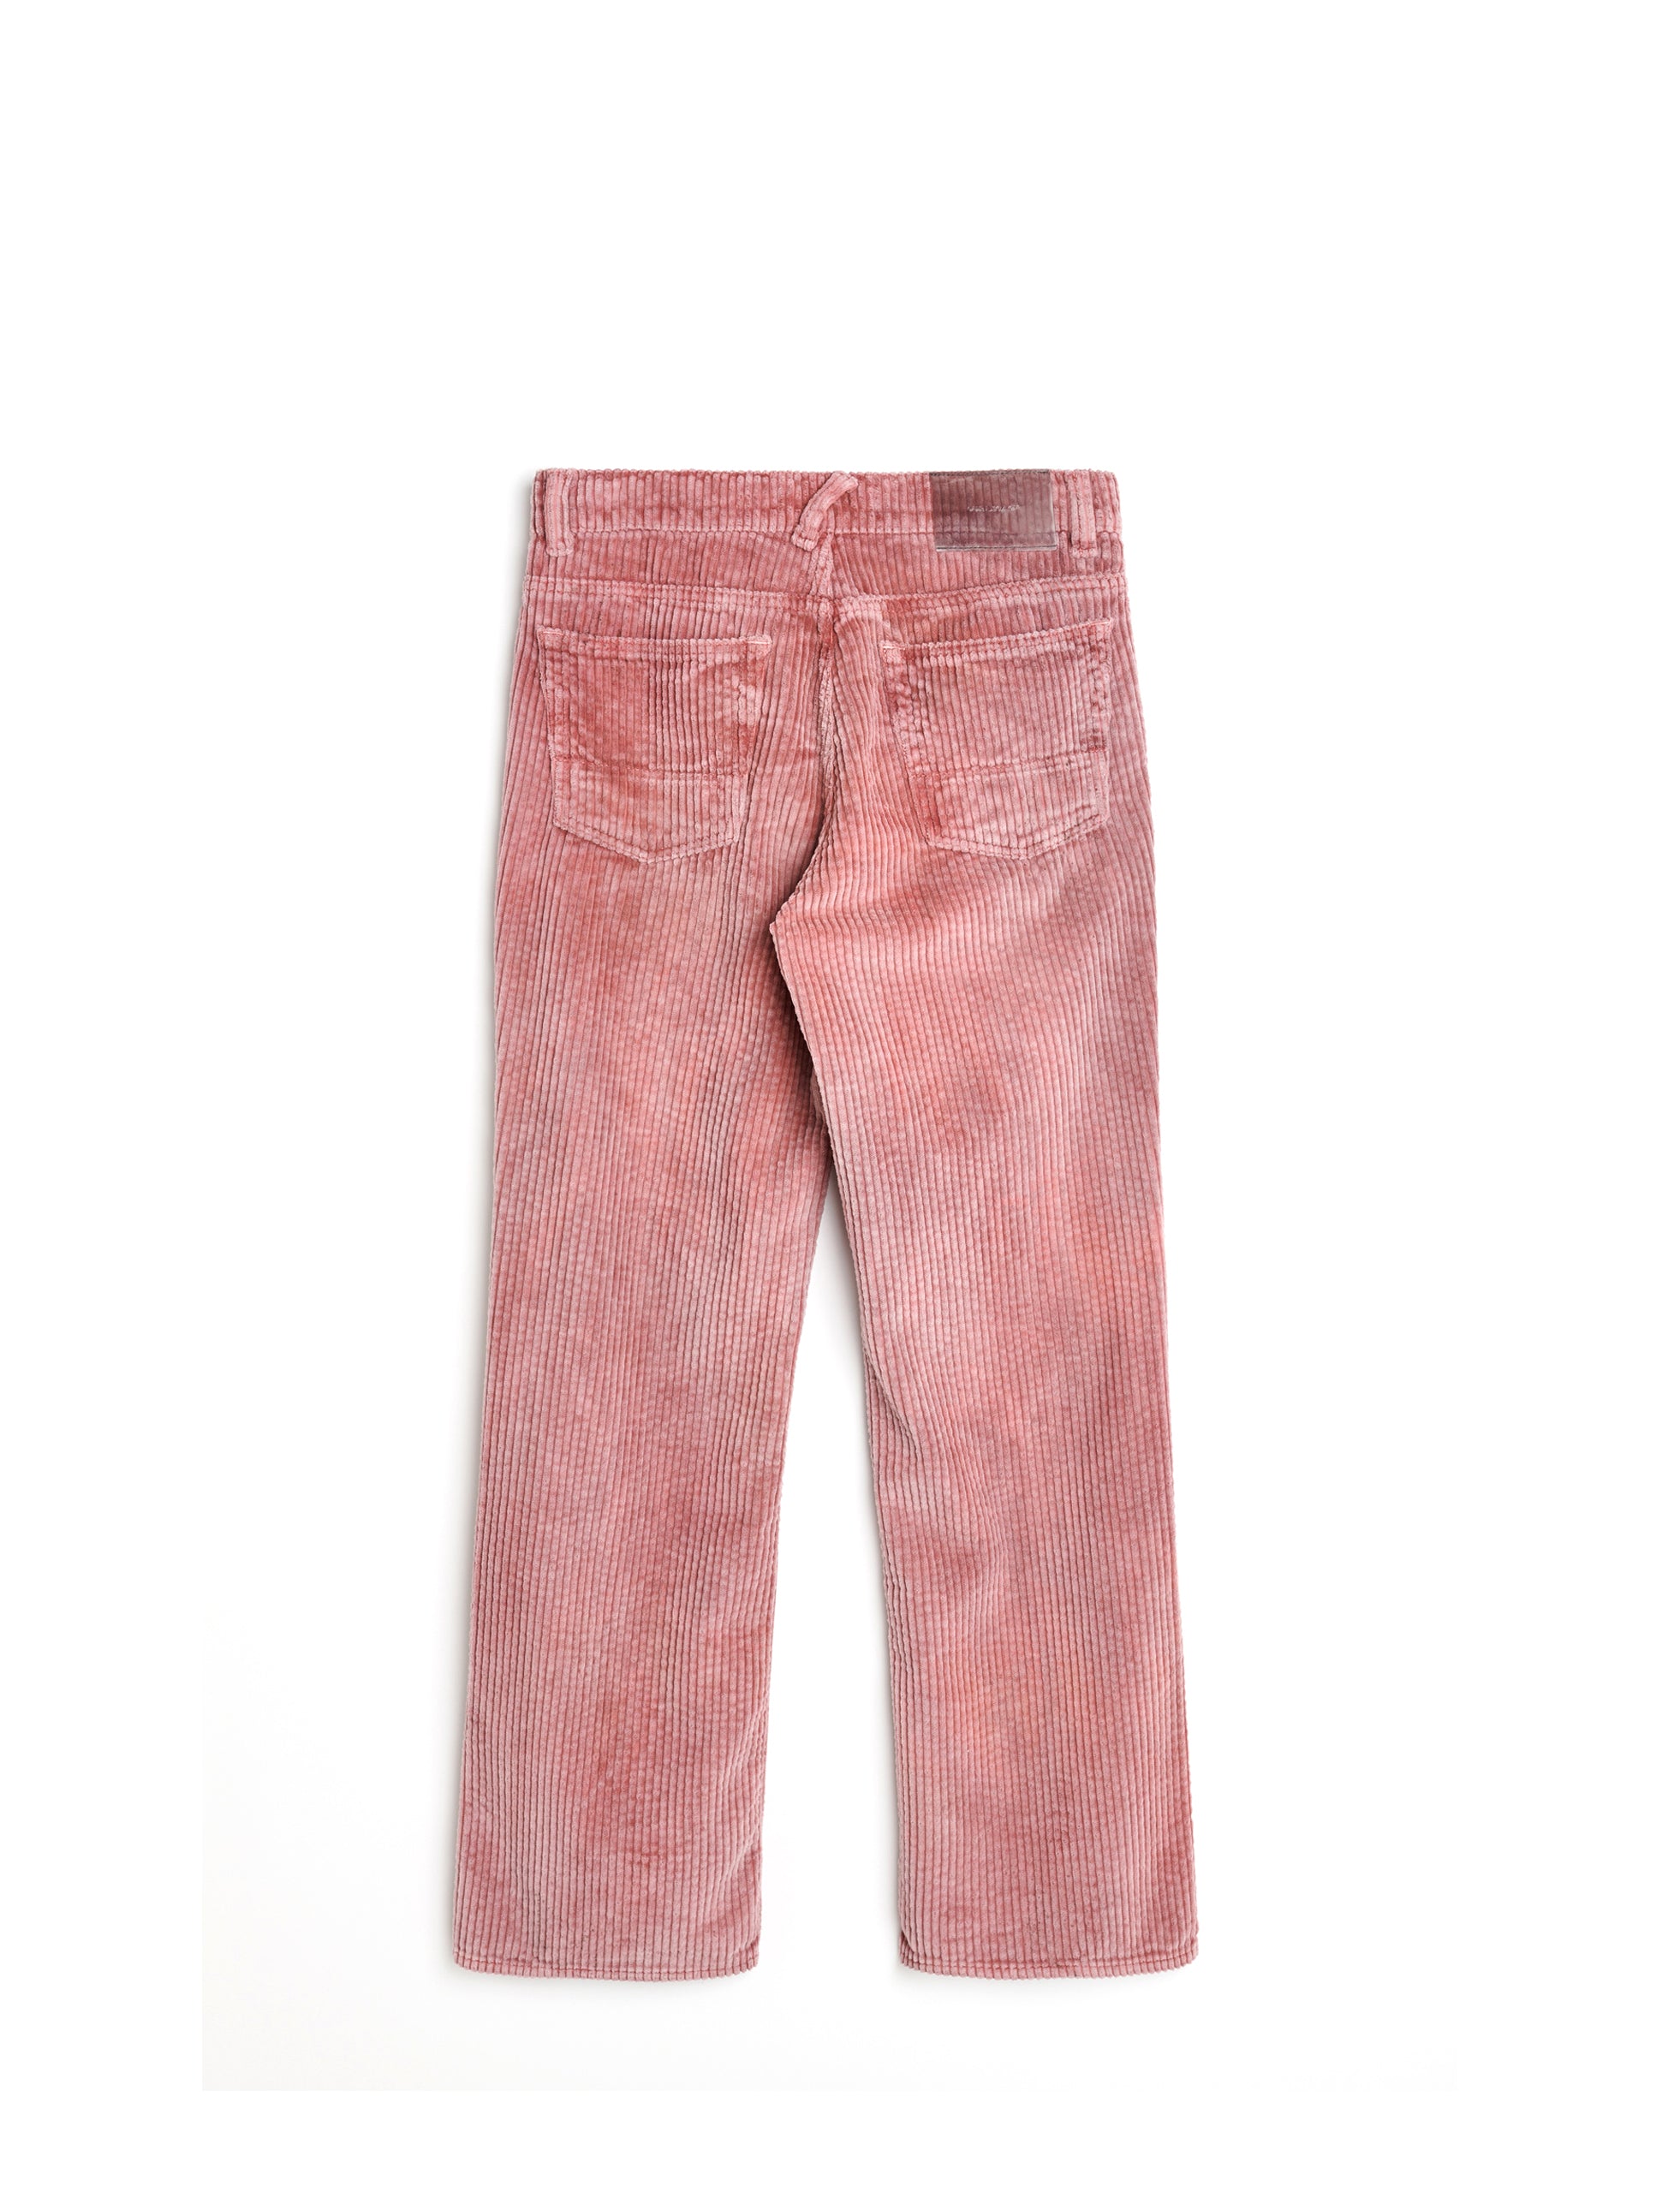 OUR LEGACY 70S CUT ANTIQUE PINK RUSTIC CORD - minishopmadrid